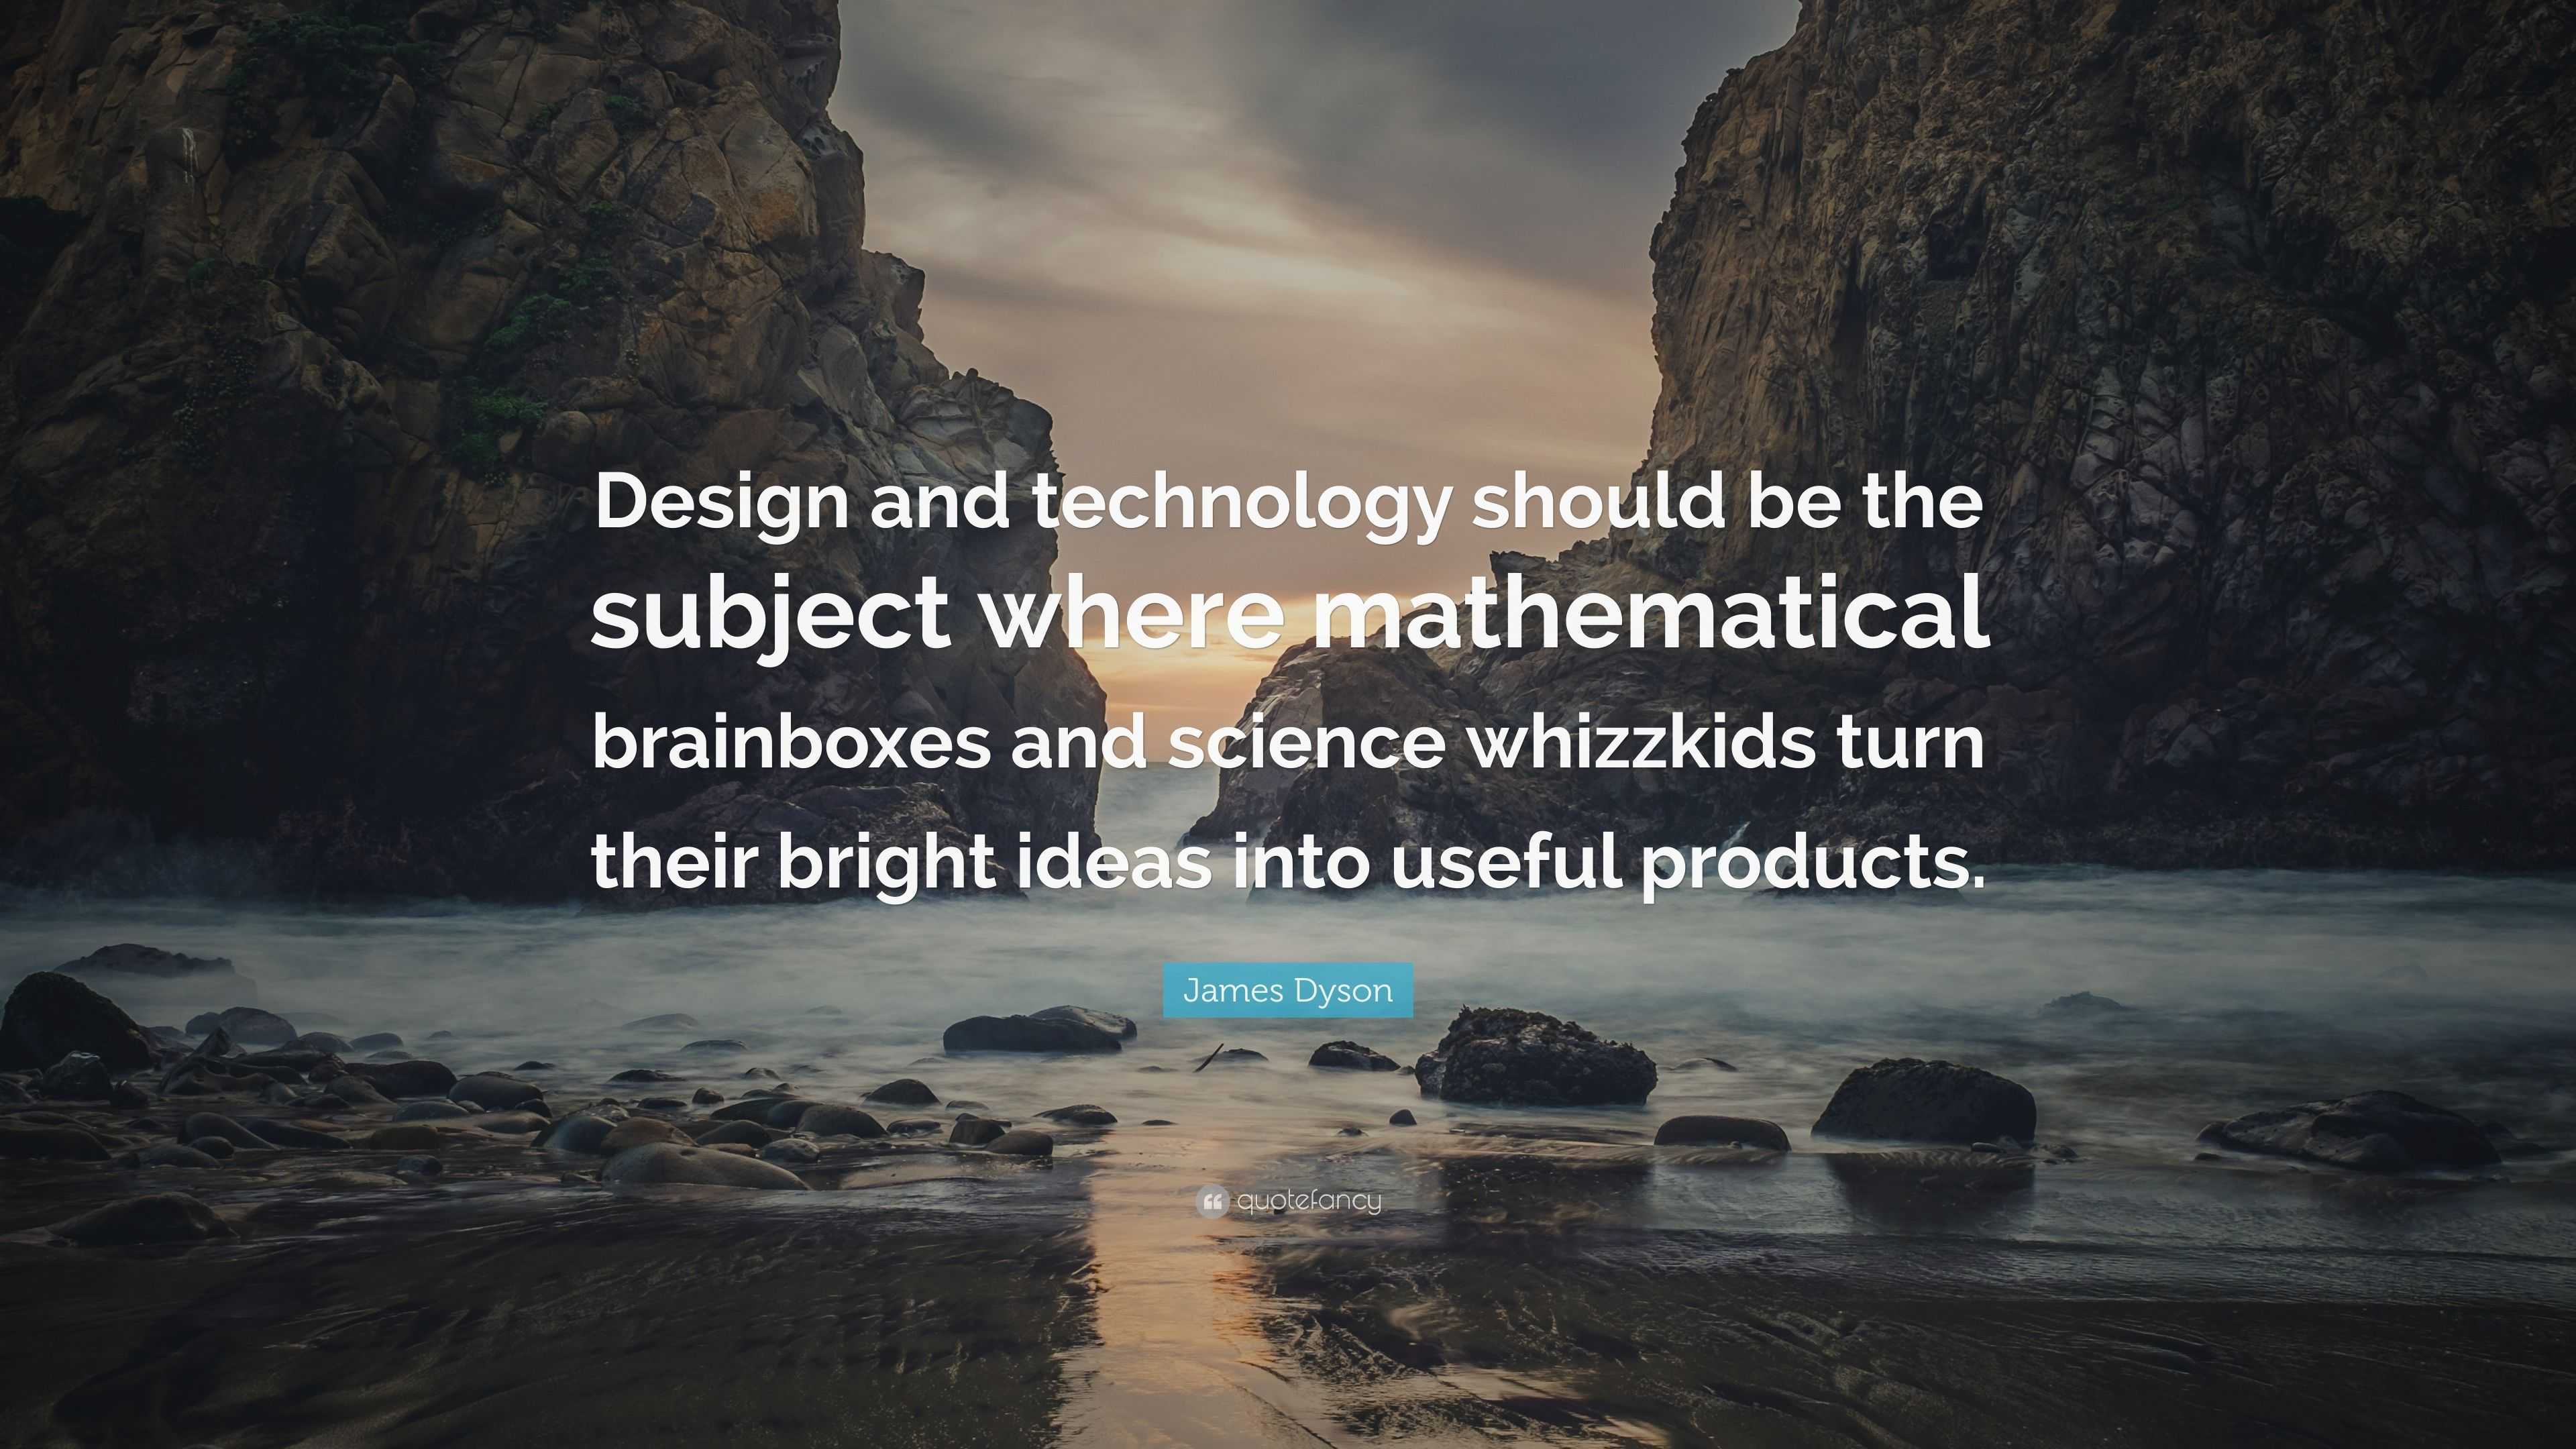 James Dyson Quote: “Design and technology should be the subject where  mathematical brainboxes and science whizzkids turn their bright ideas ...”